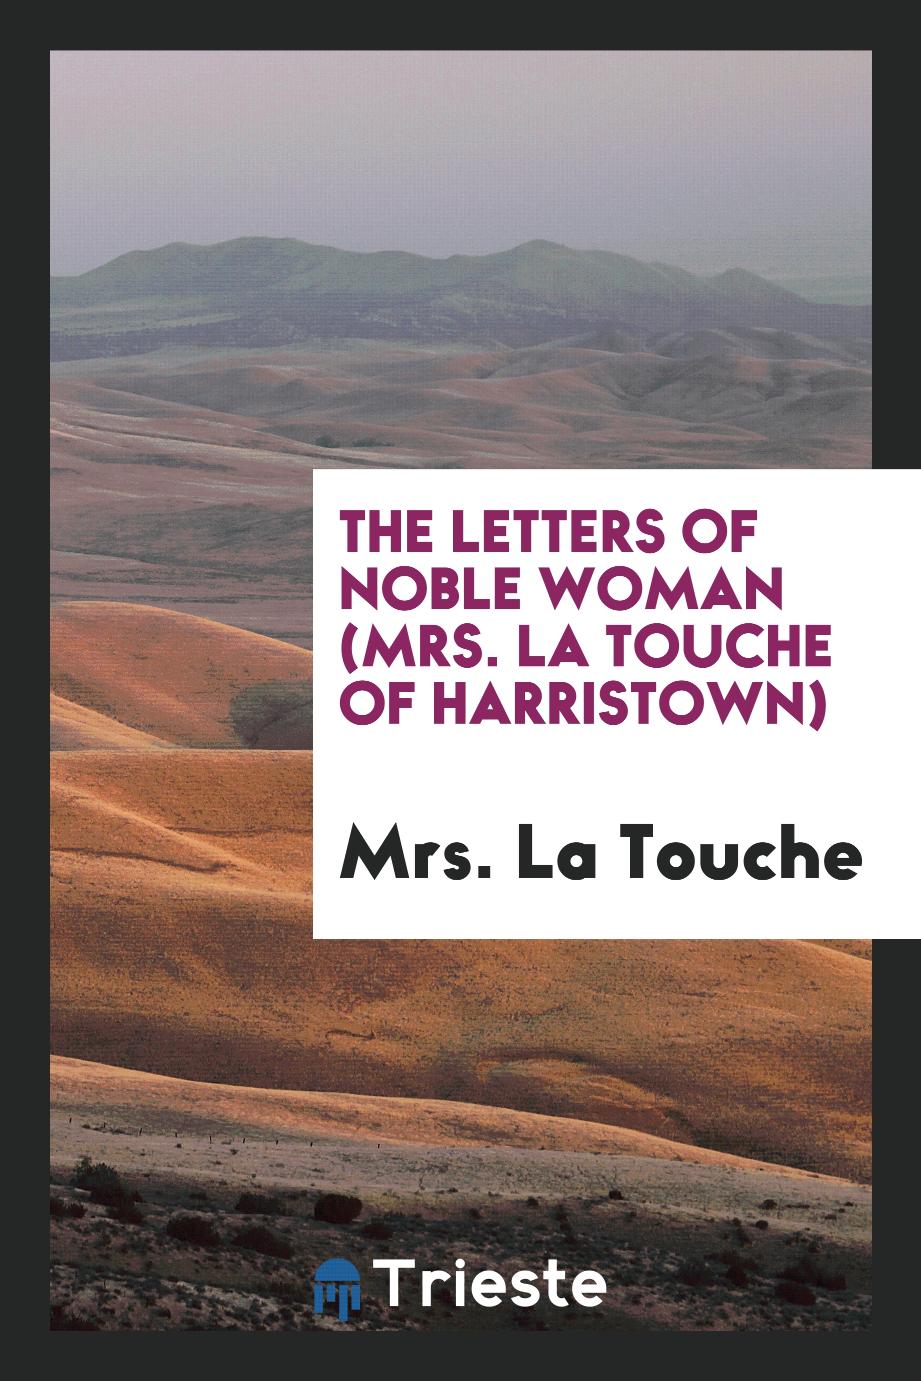 The letters of noble woman (Mrs. La Touche of Harristown)